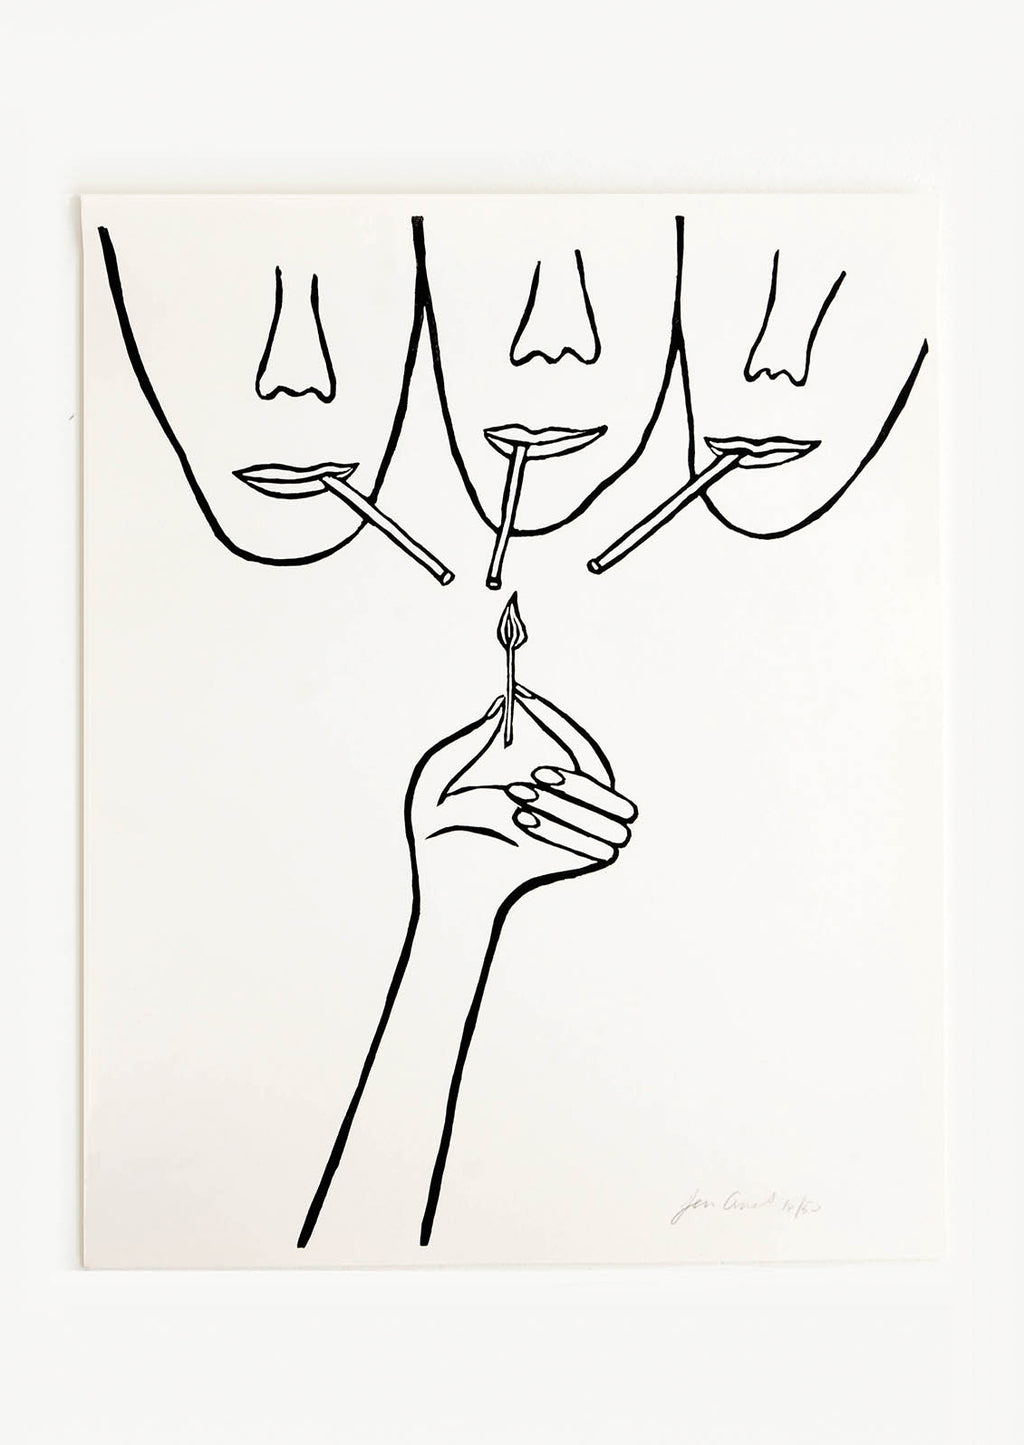 1: Hand printed artwork with off-white background and black drawing of three faces from the nose down, holding cigarettes up to a flame